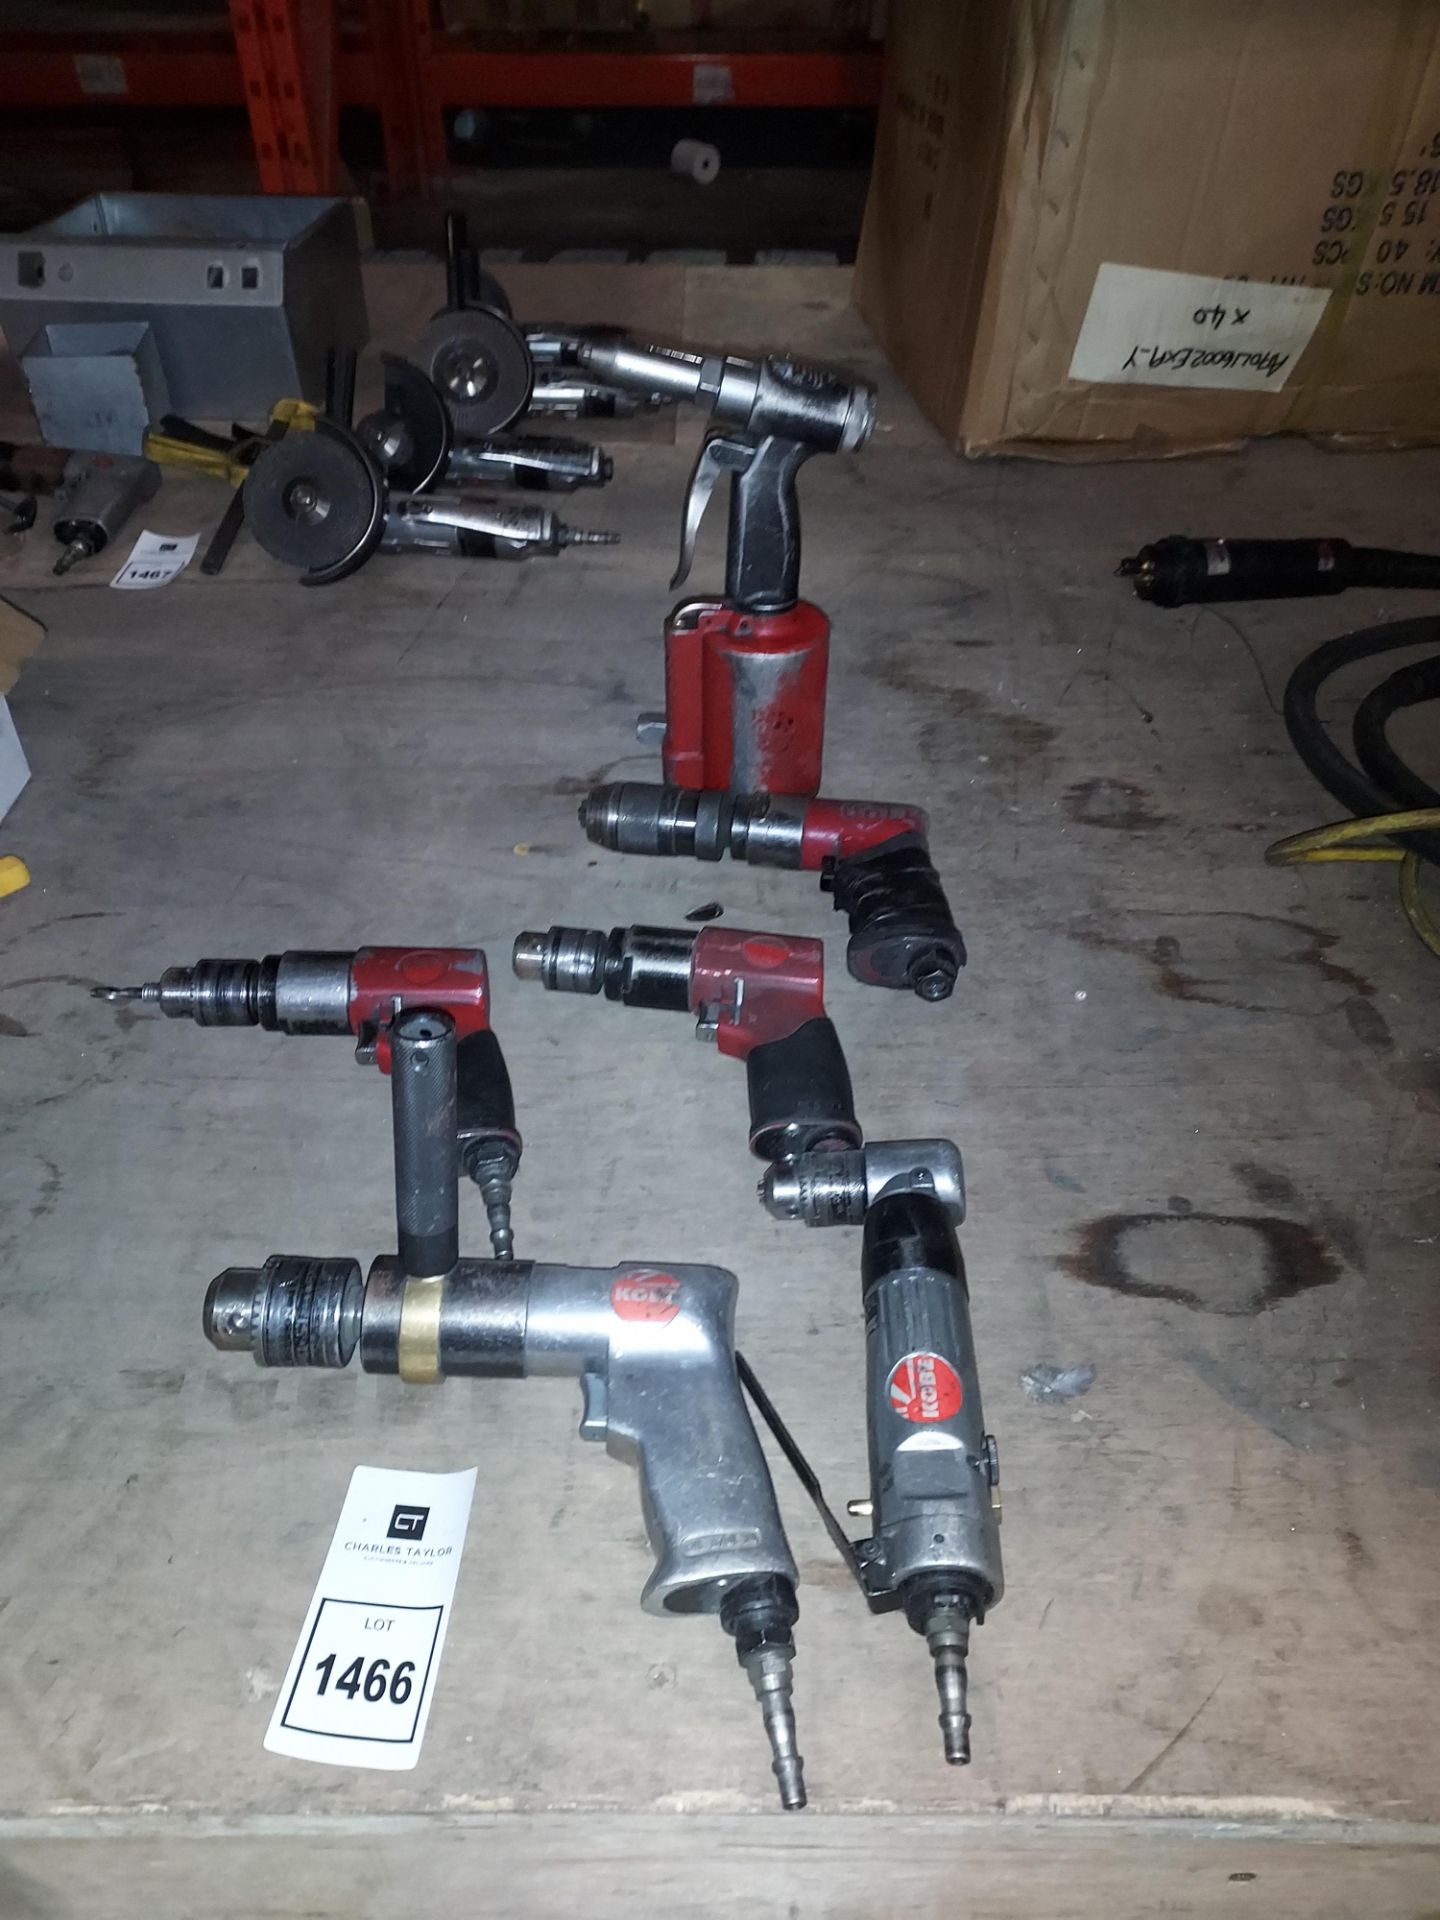 6 X PIECE MIXED TOOL LOT CONTAINING - CHICAGO CP NUMATIC AIR RIVETER- CHICAGO CP NUMATIC DRILL- 4X